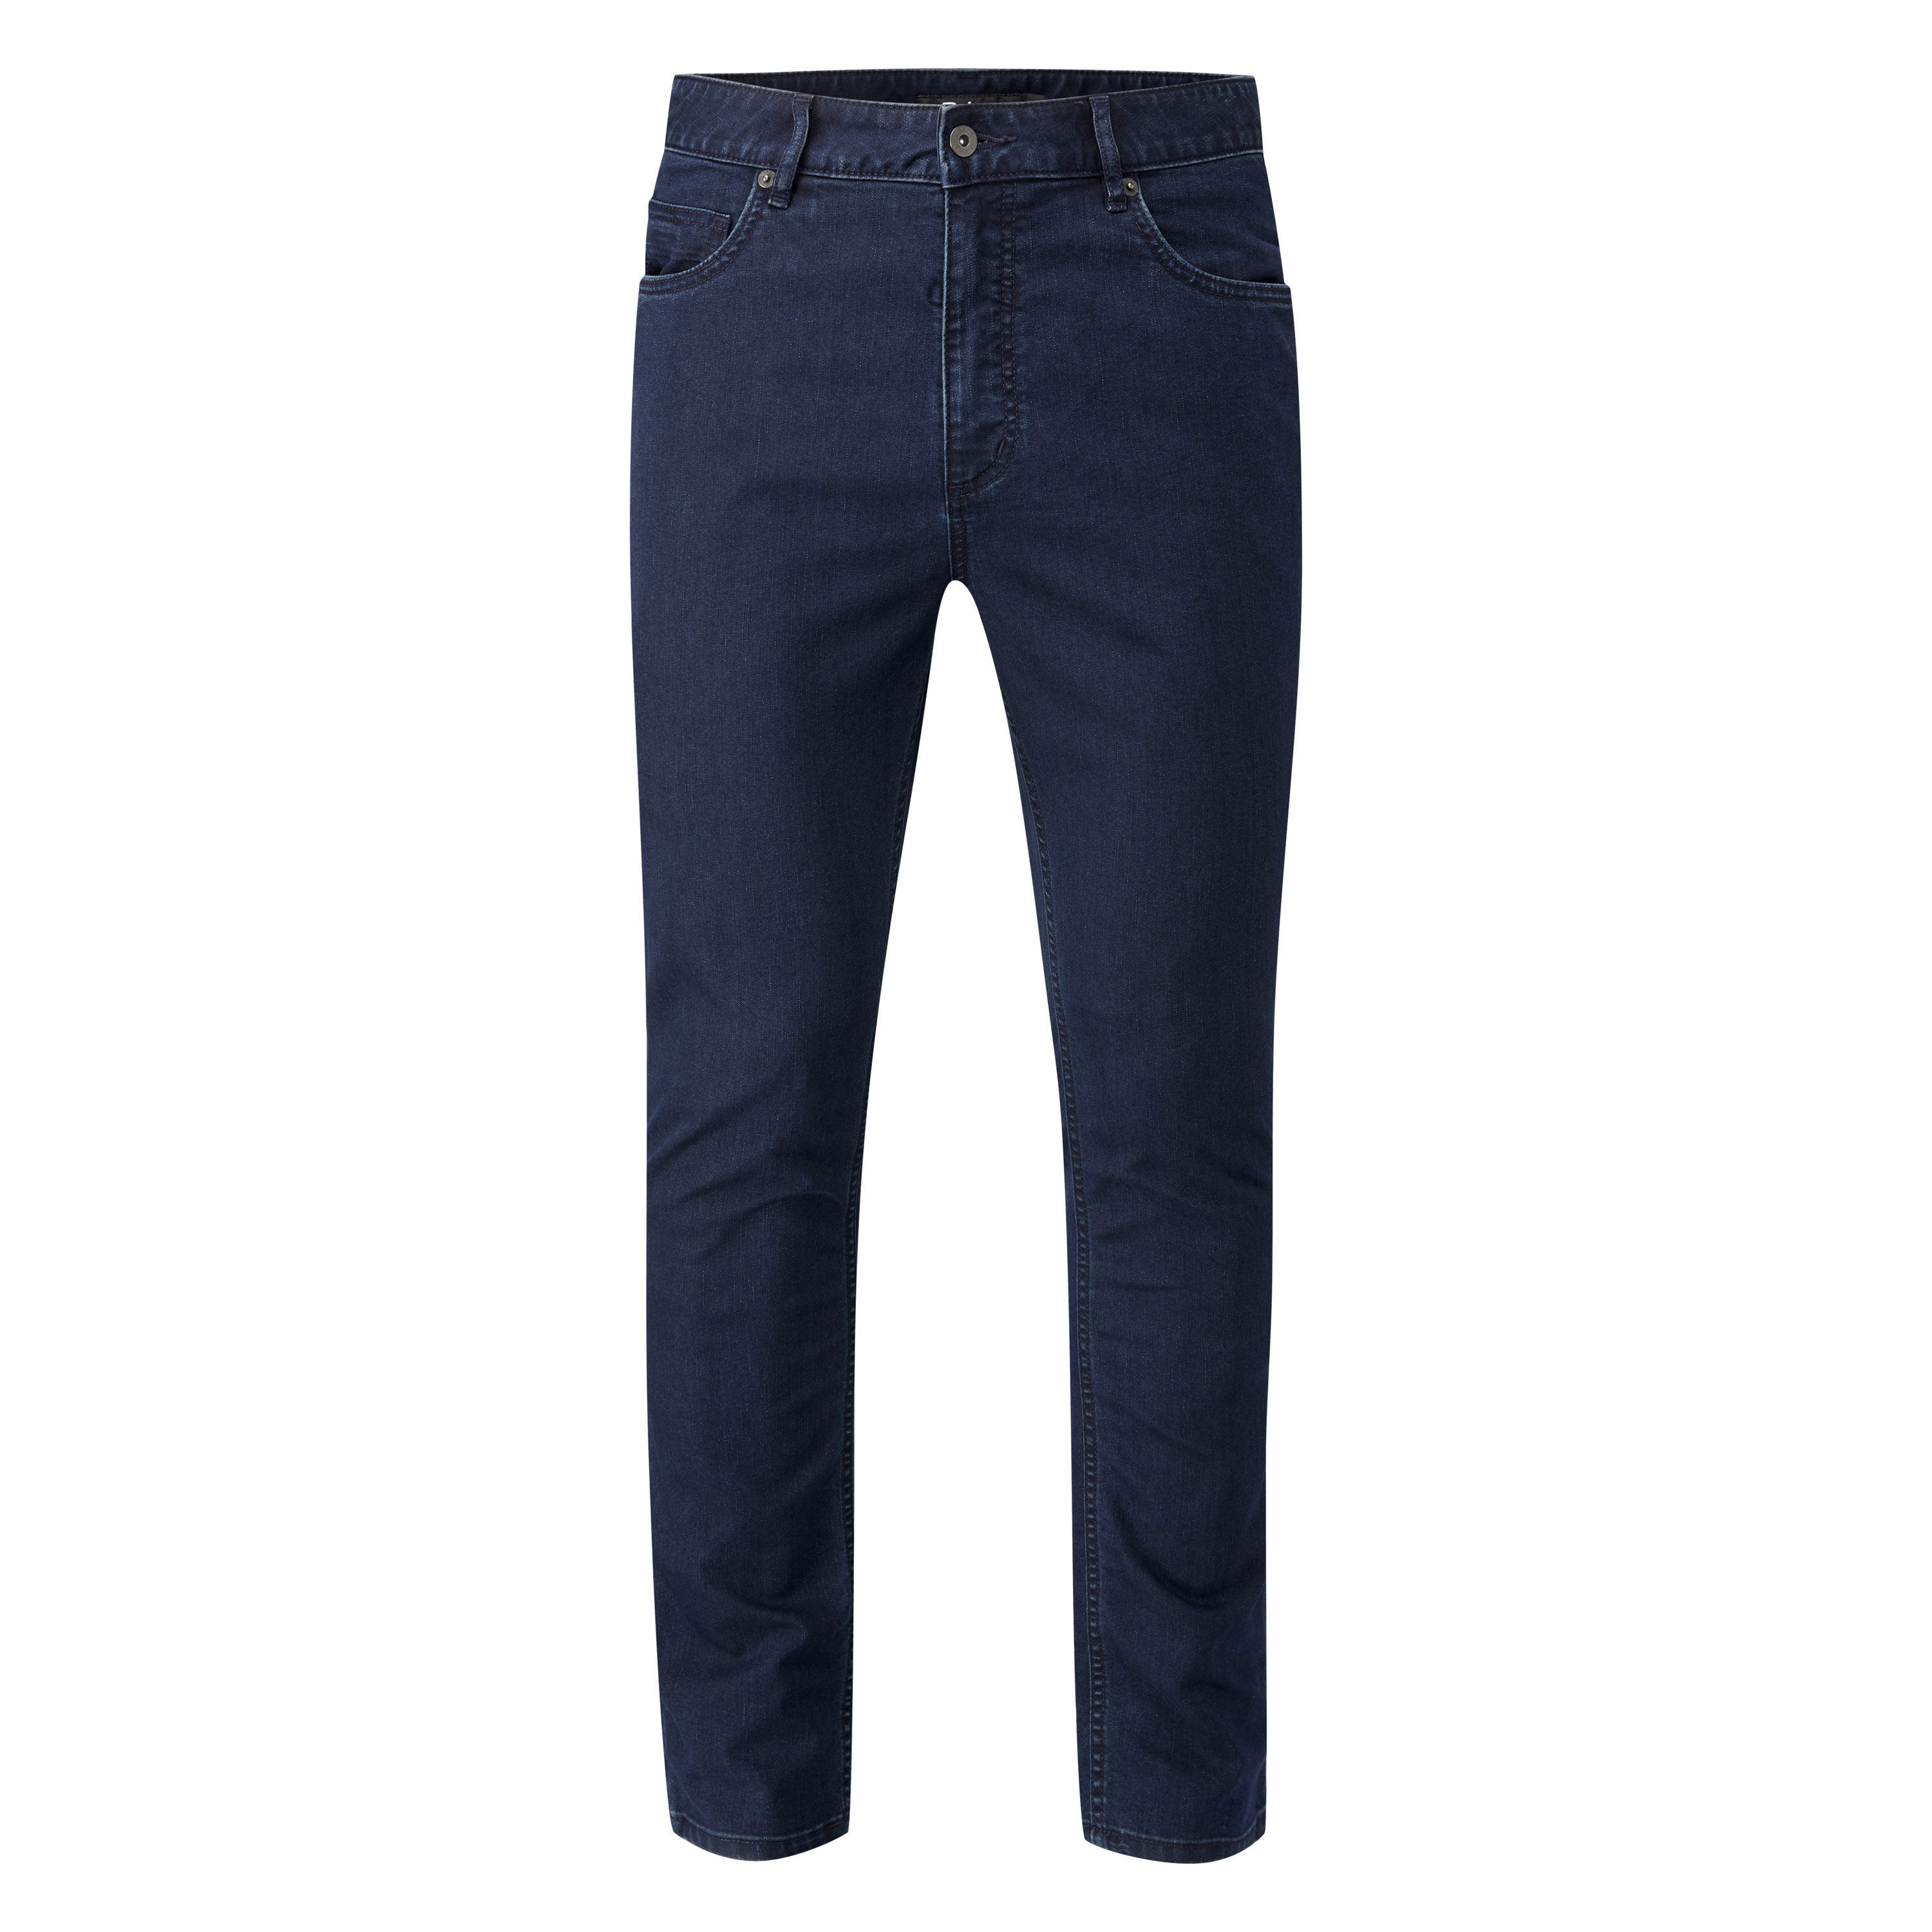 mens jeans tapered fit